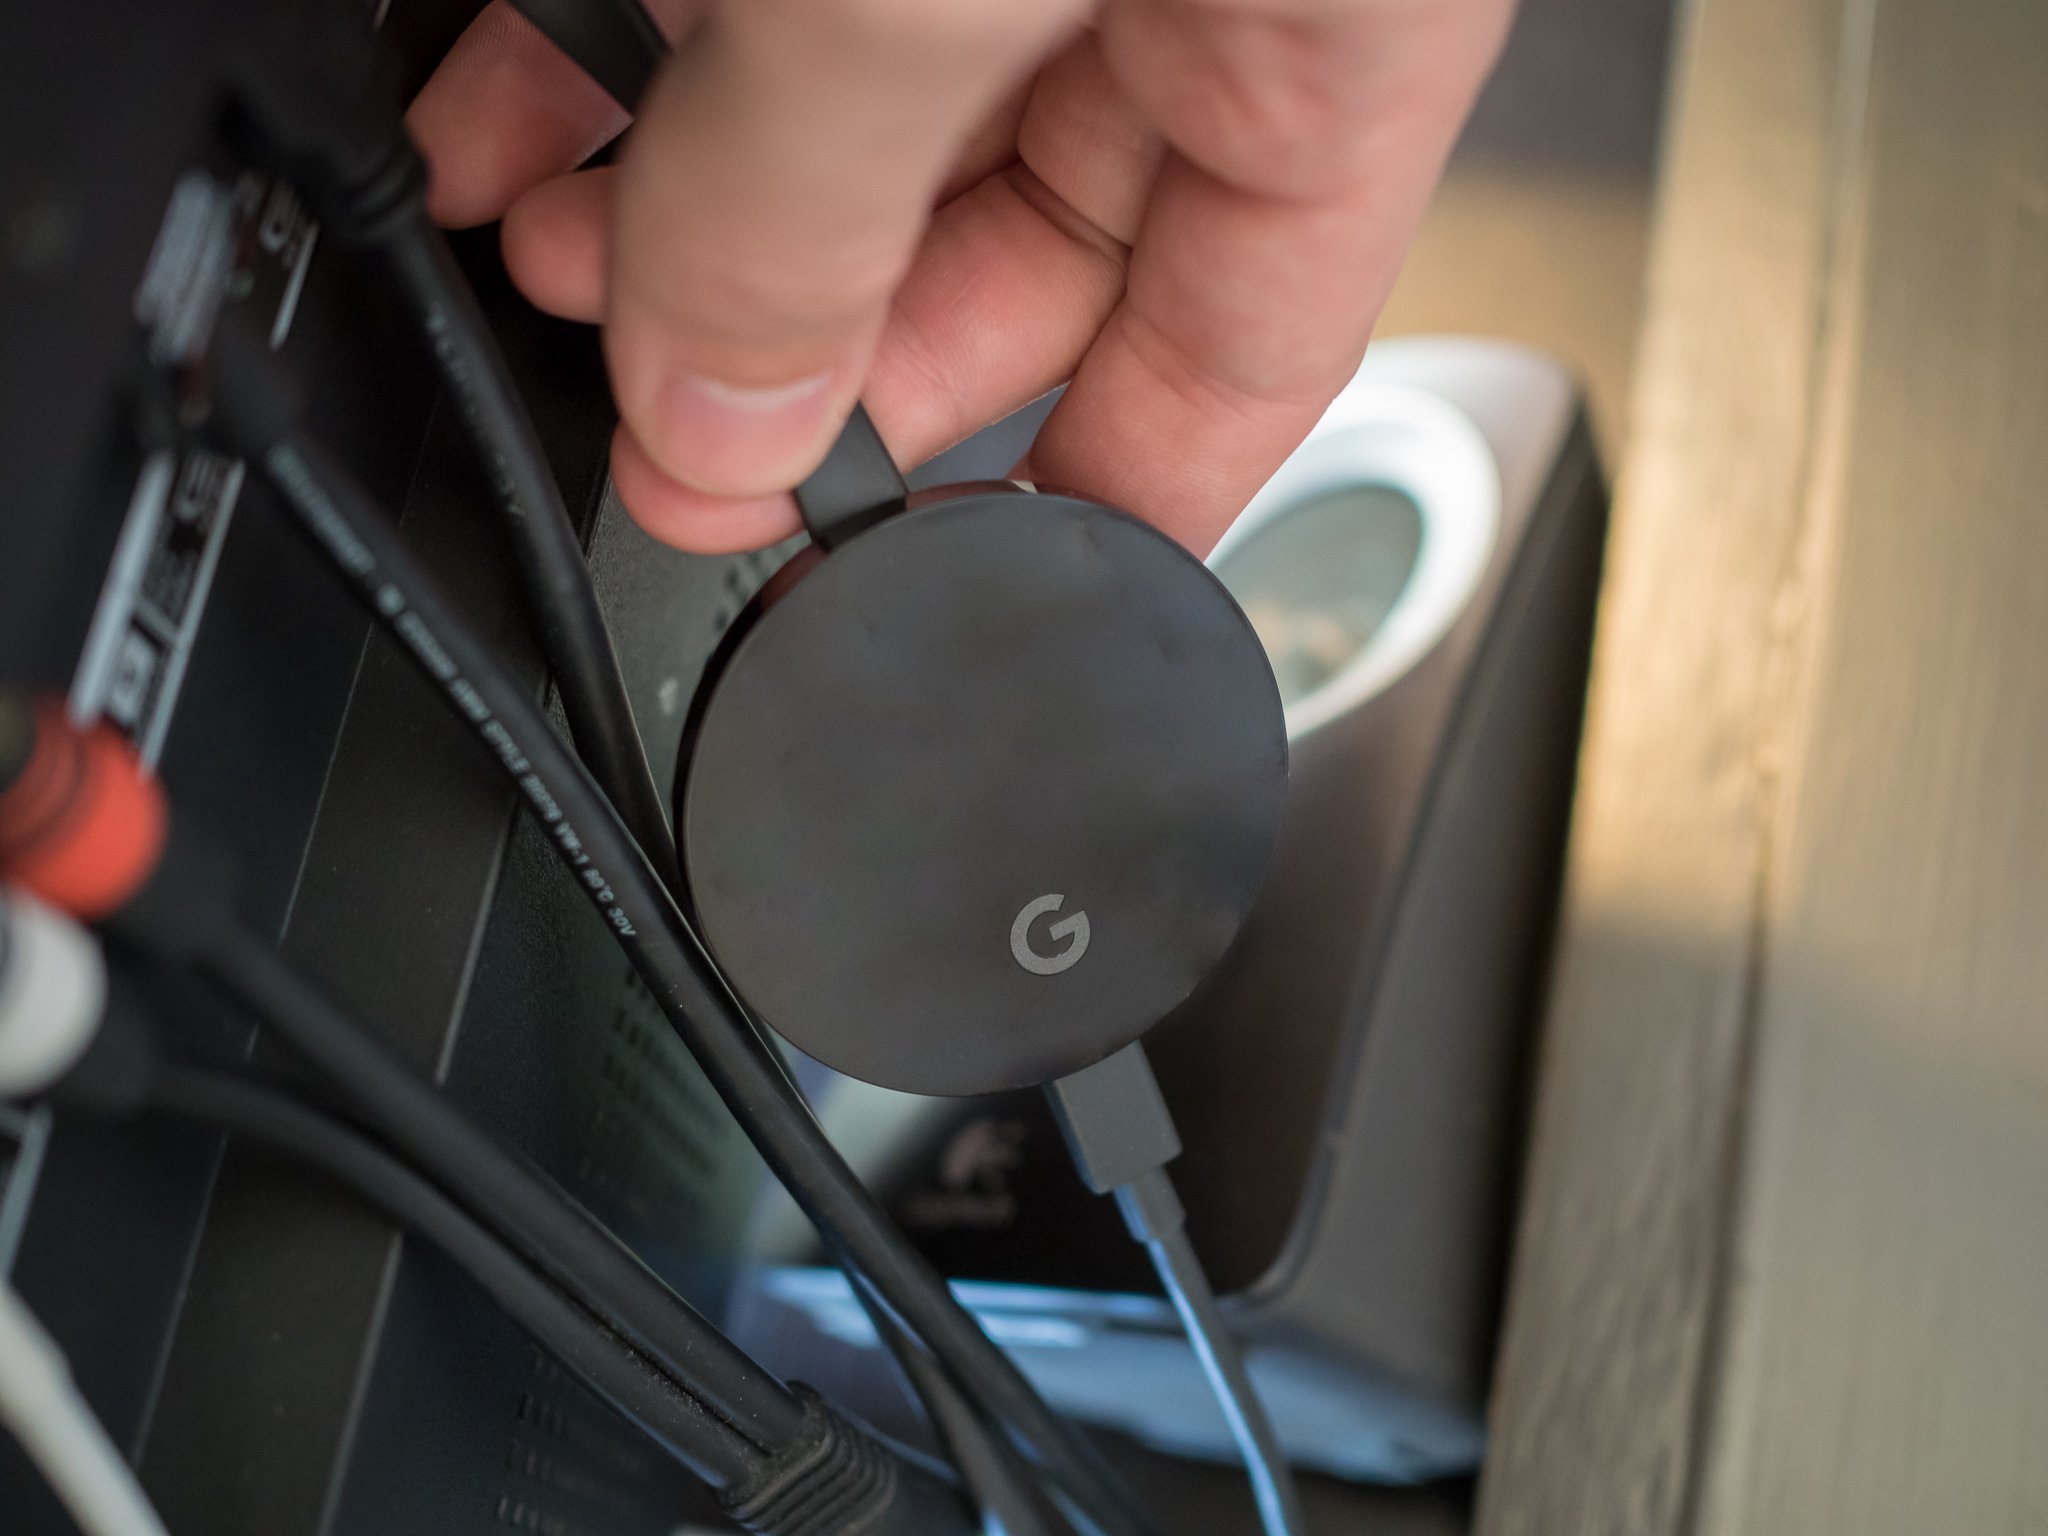 Can connect a Chromecast power cord to your TV USB port? | Android